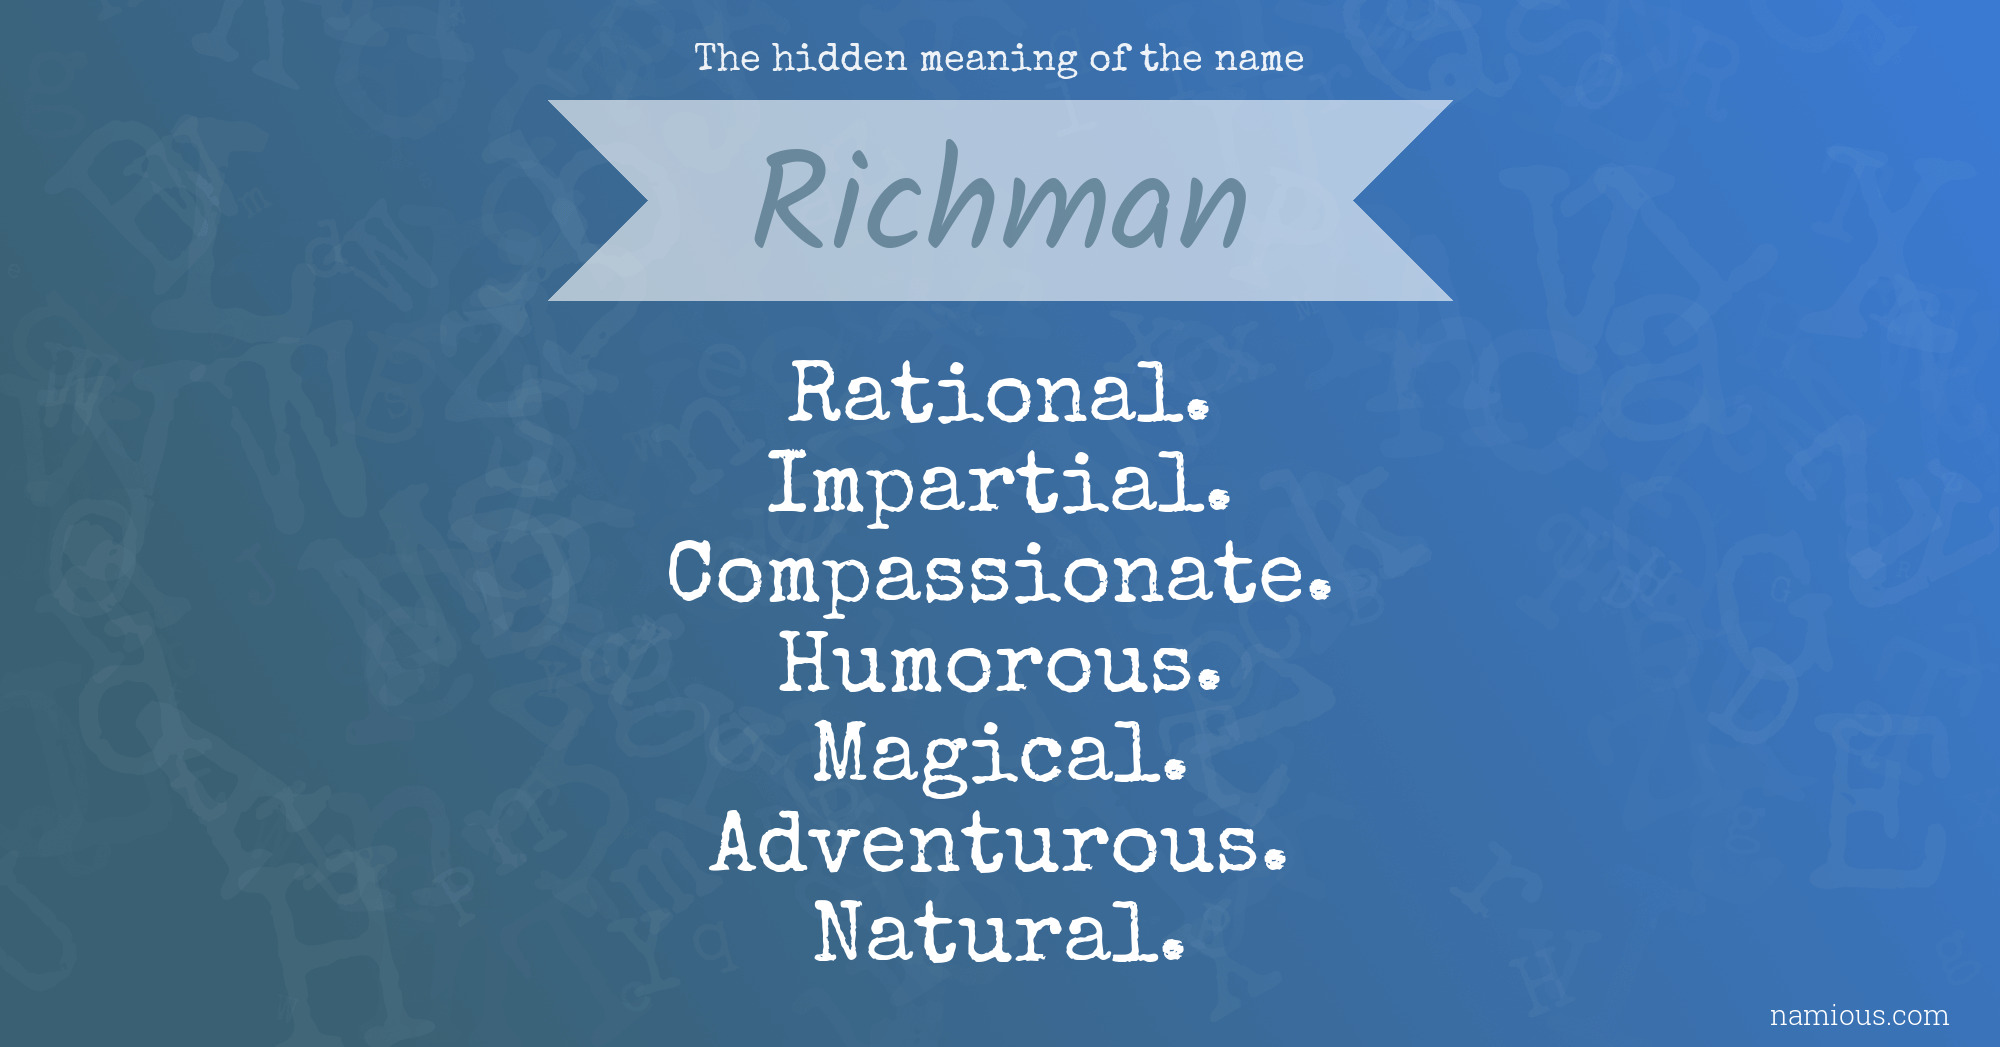 The hidden meaning of the name Richman